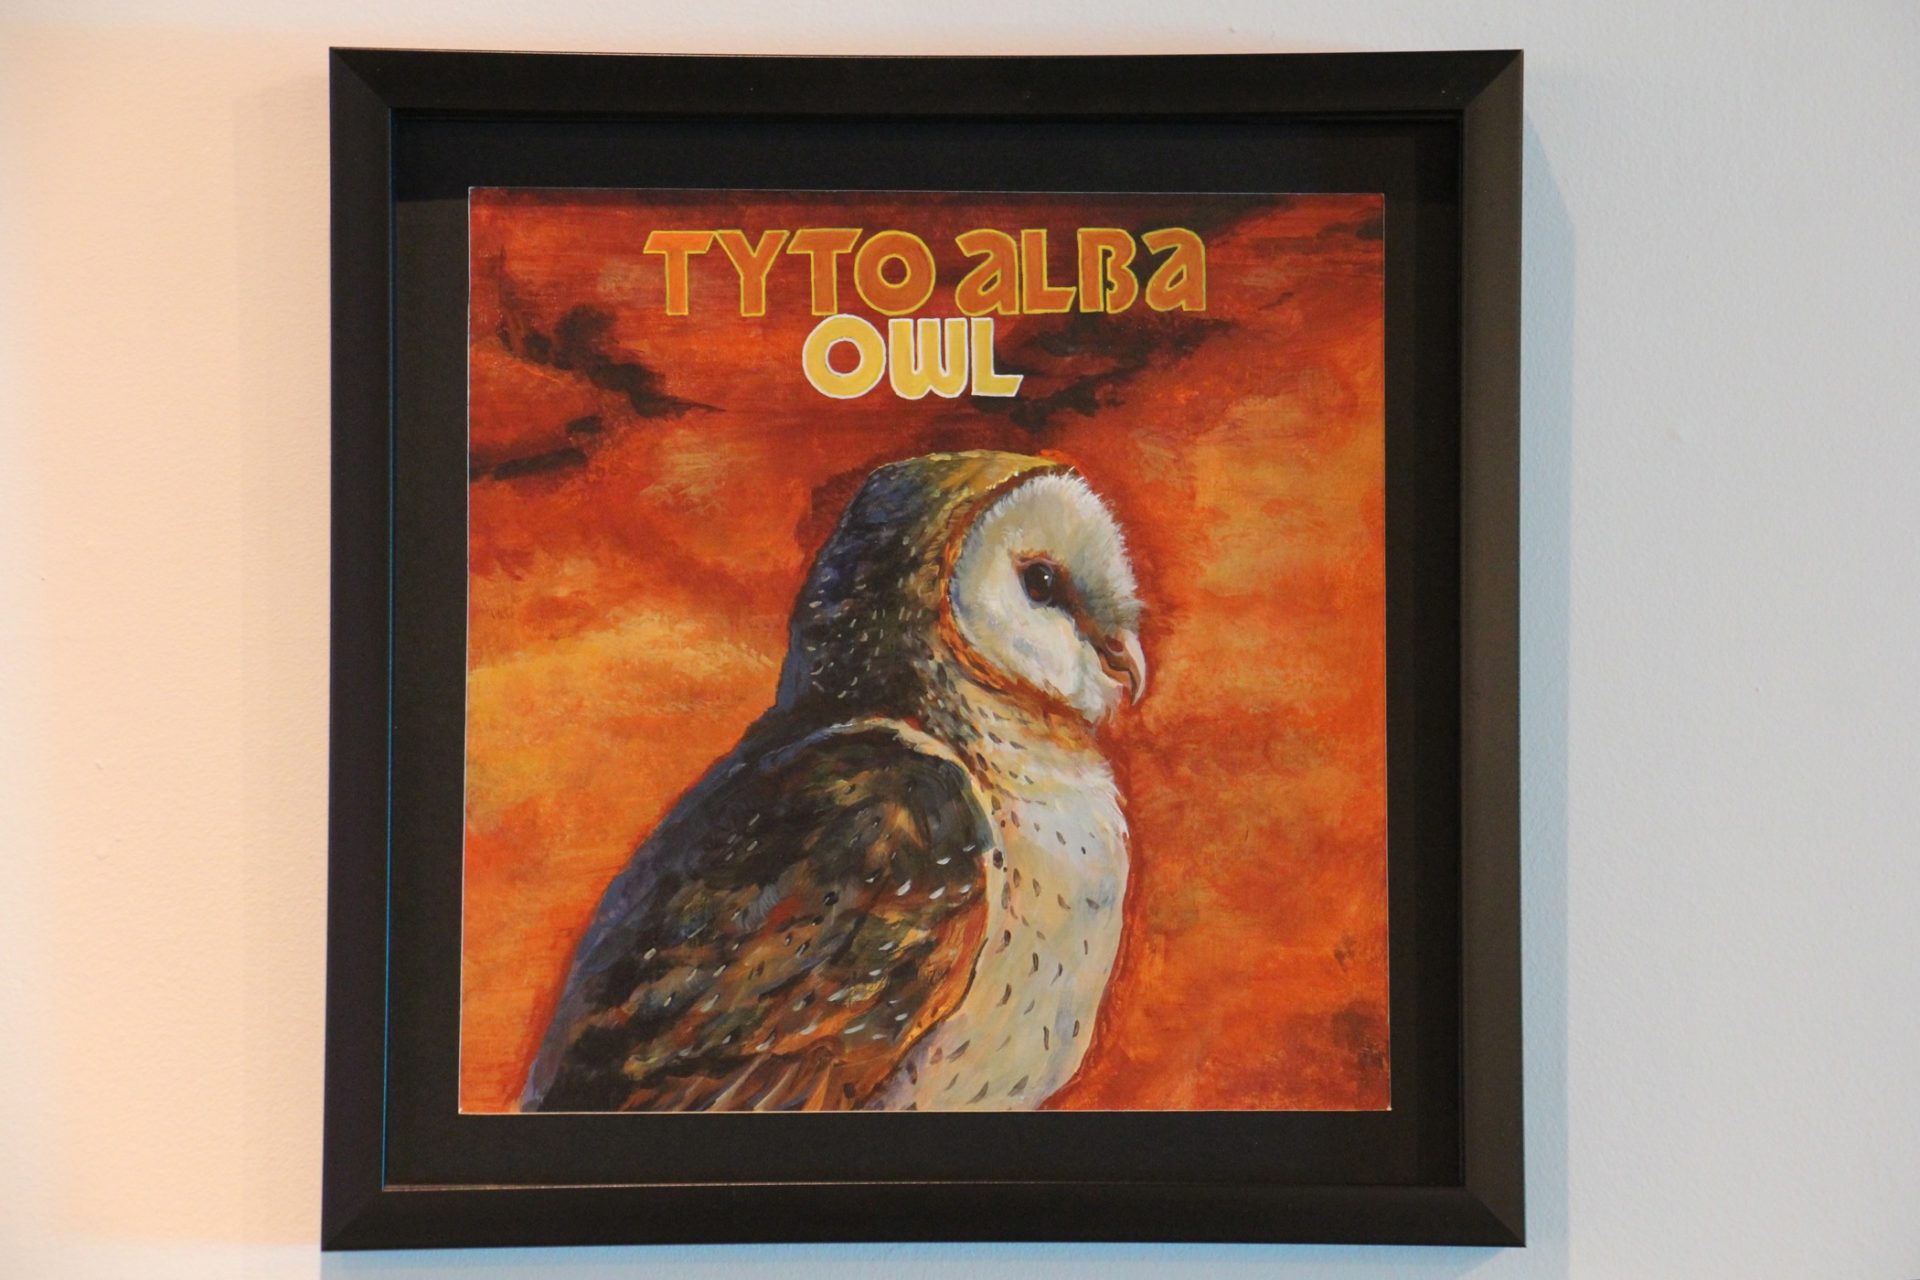 Heather Diacont Rinehart, alludes to the Bowie album 'Low' with her portrait of a barn owl, 'Tyto Alba.'